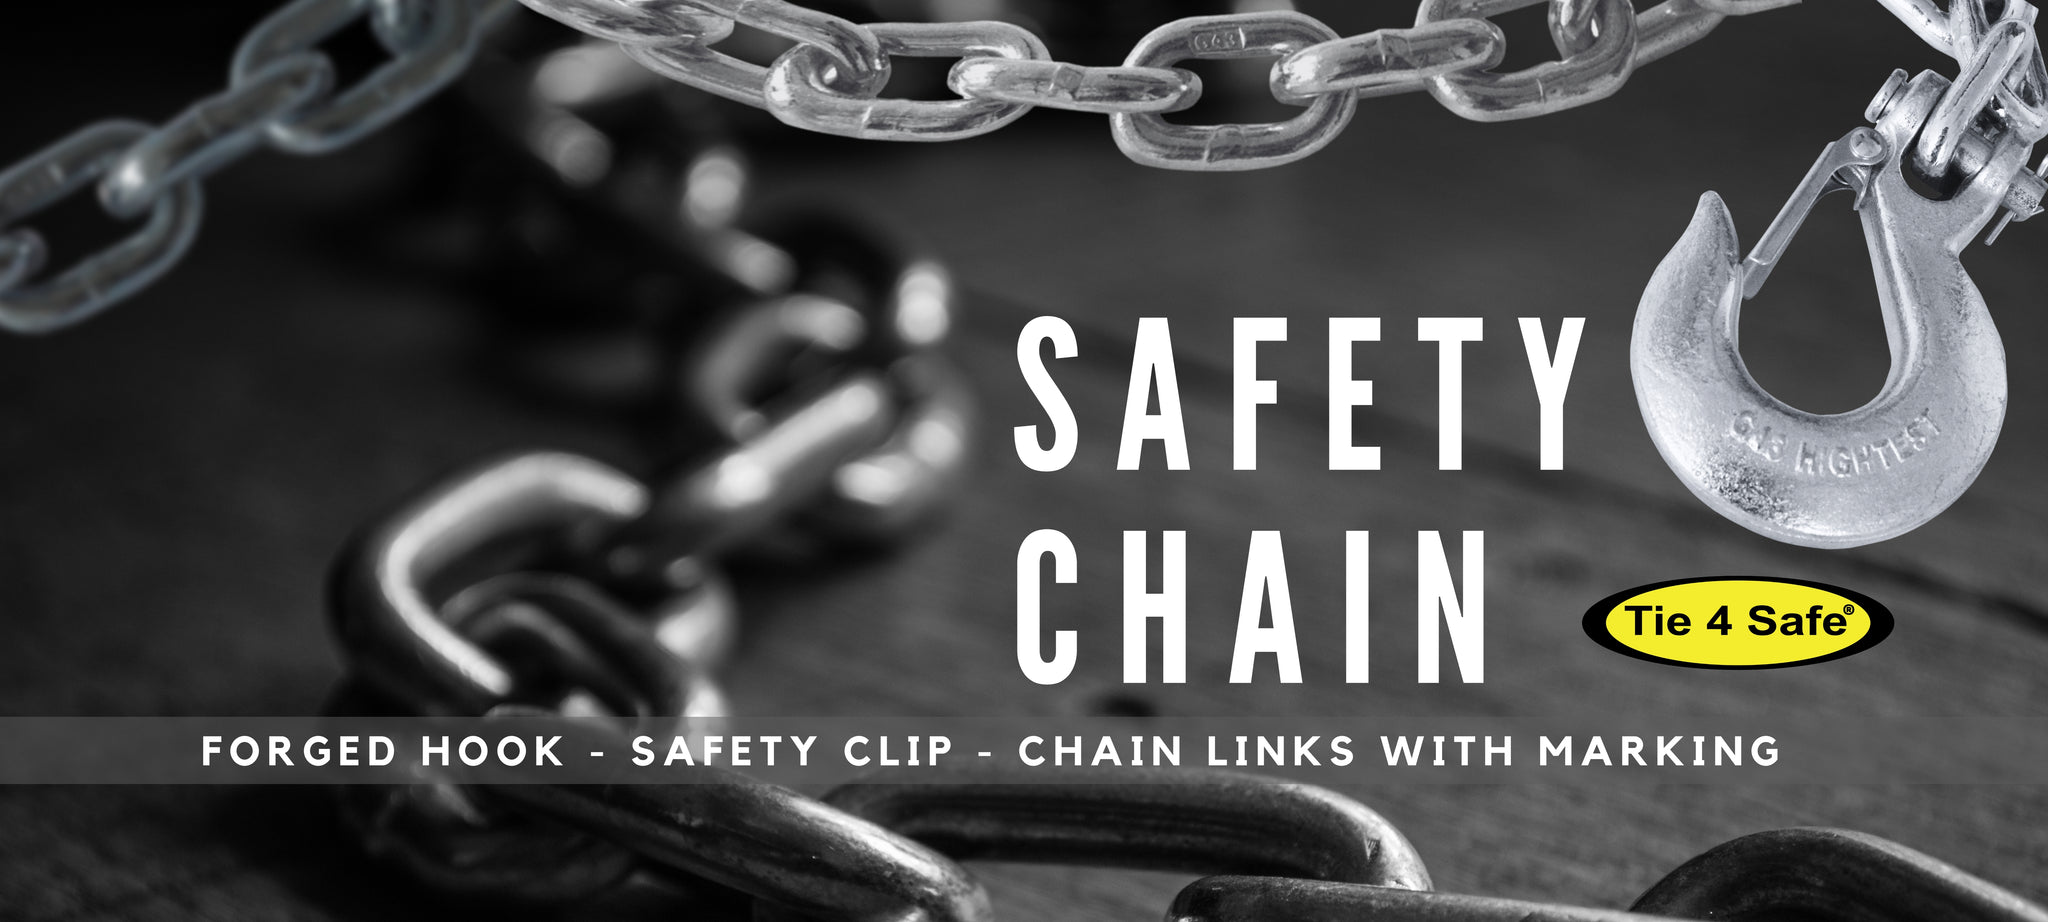 safety chains preventions article g70 towing trailer